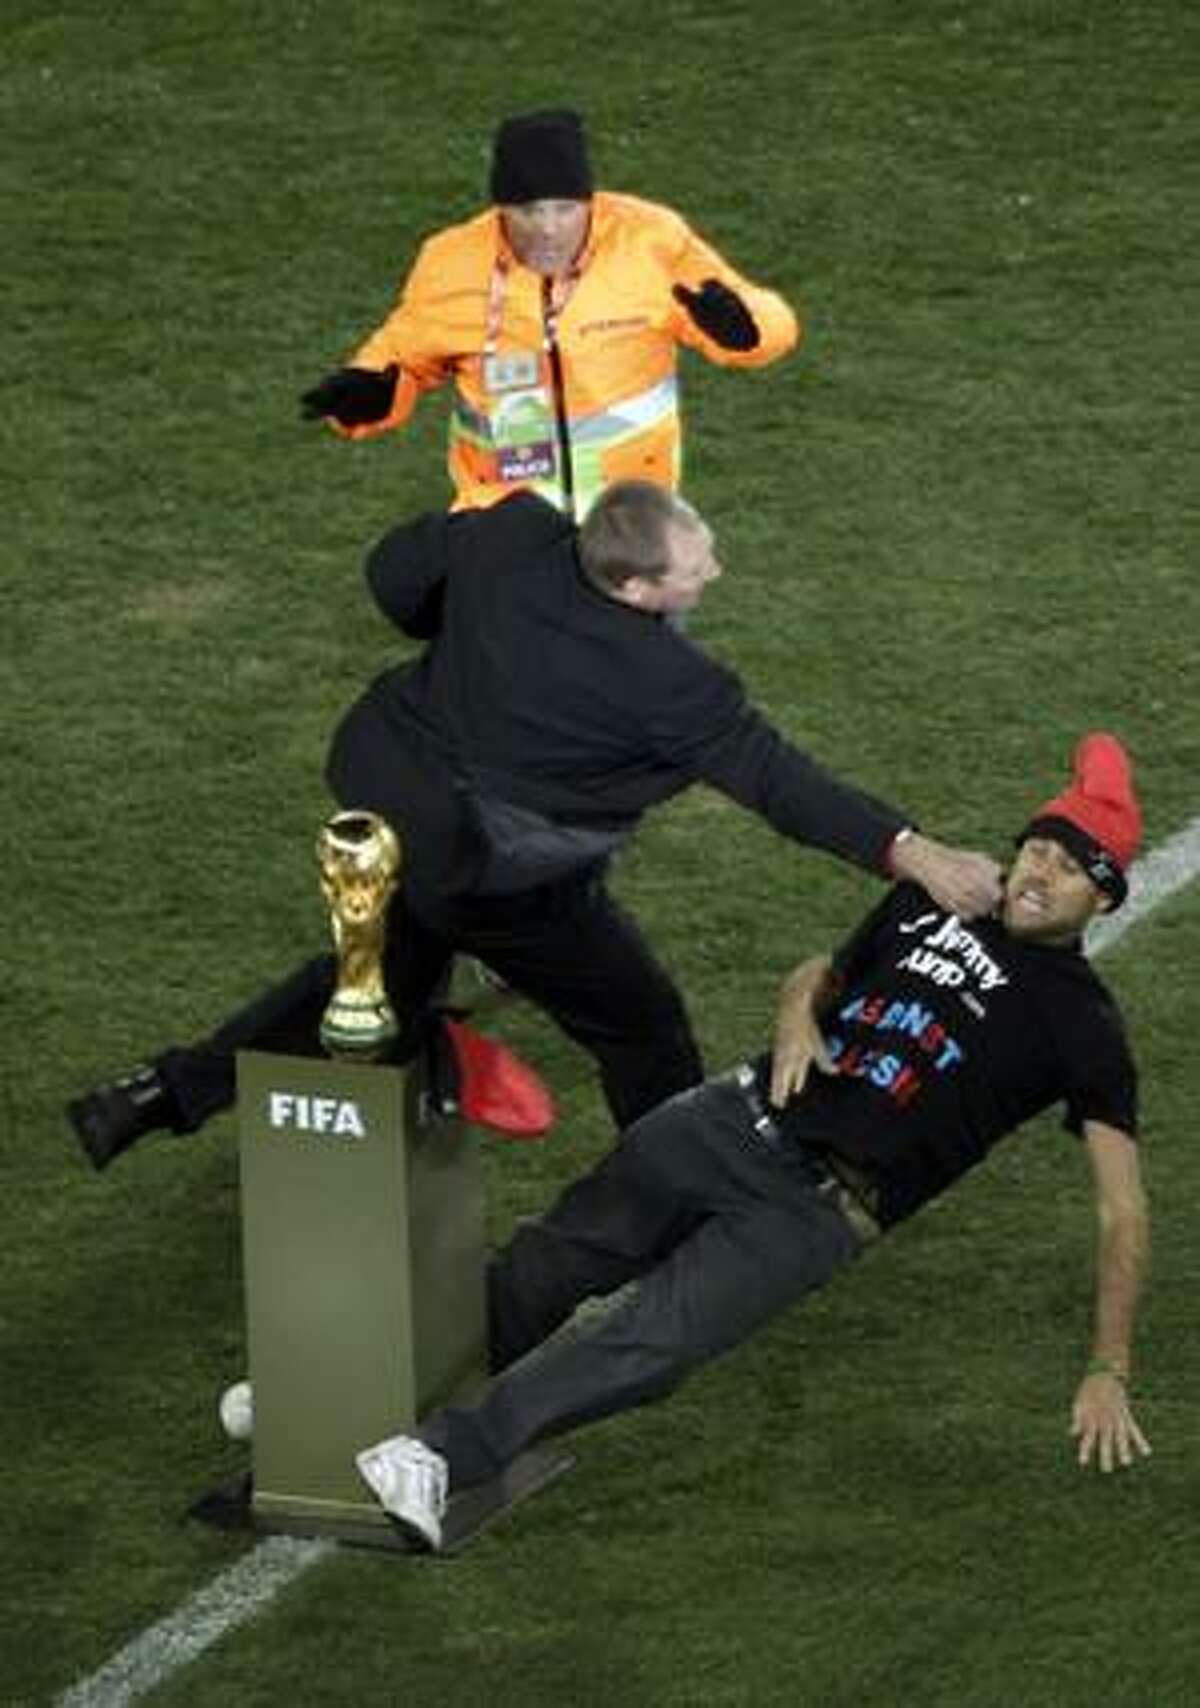 Louis Vuitton wins the World Cup, World Cup 2010